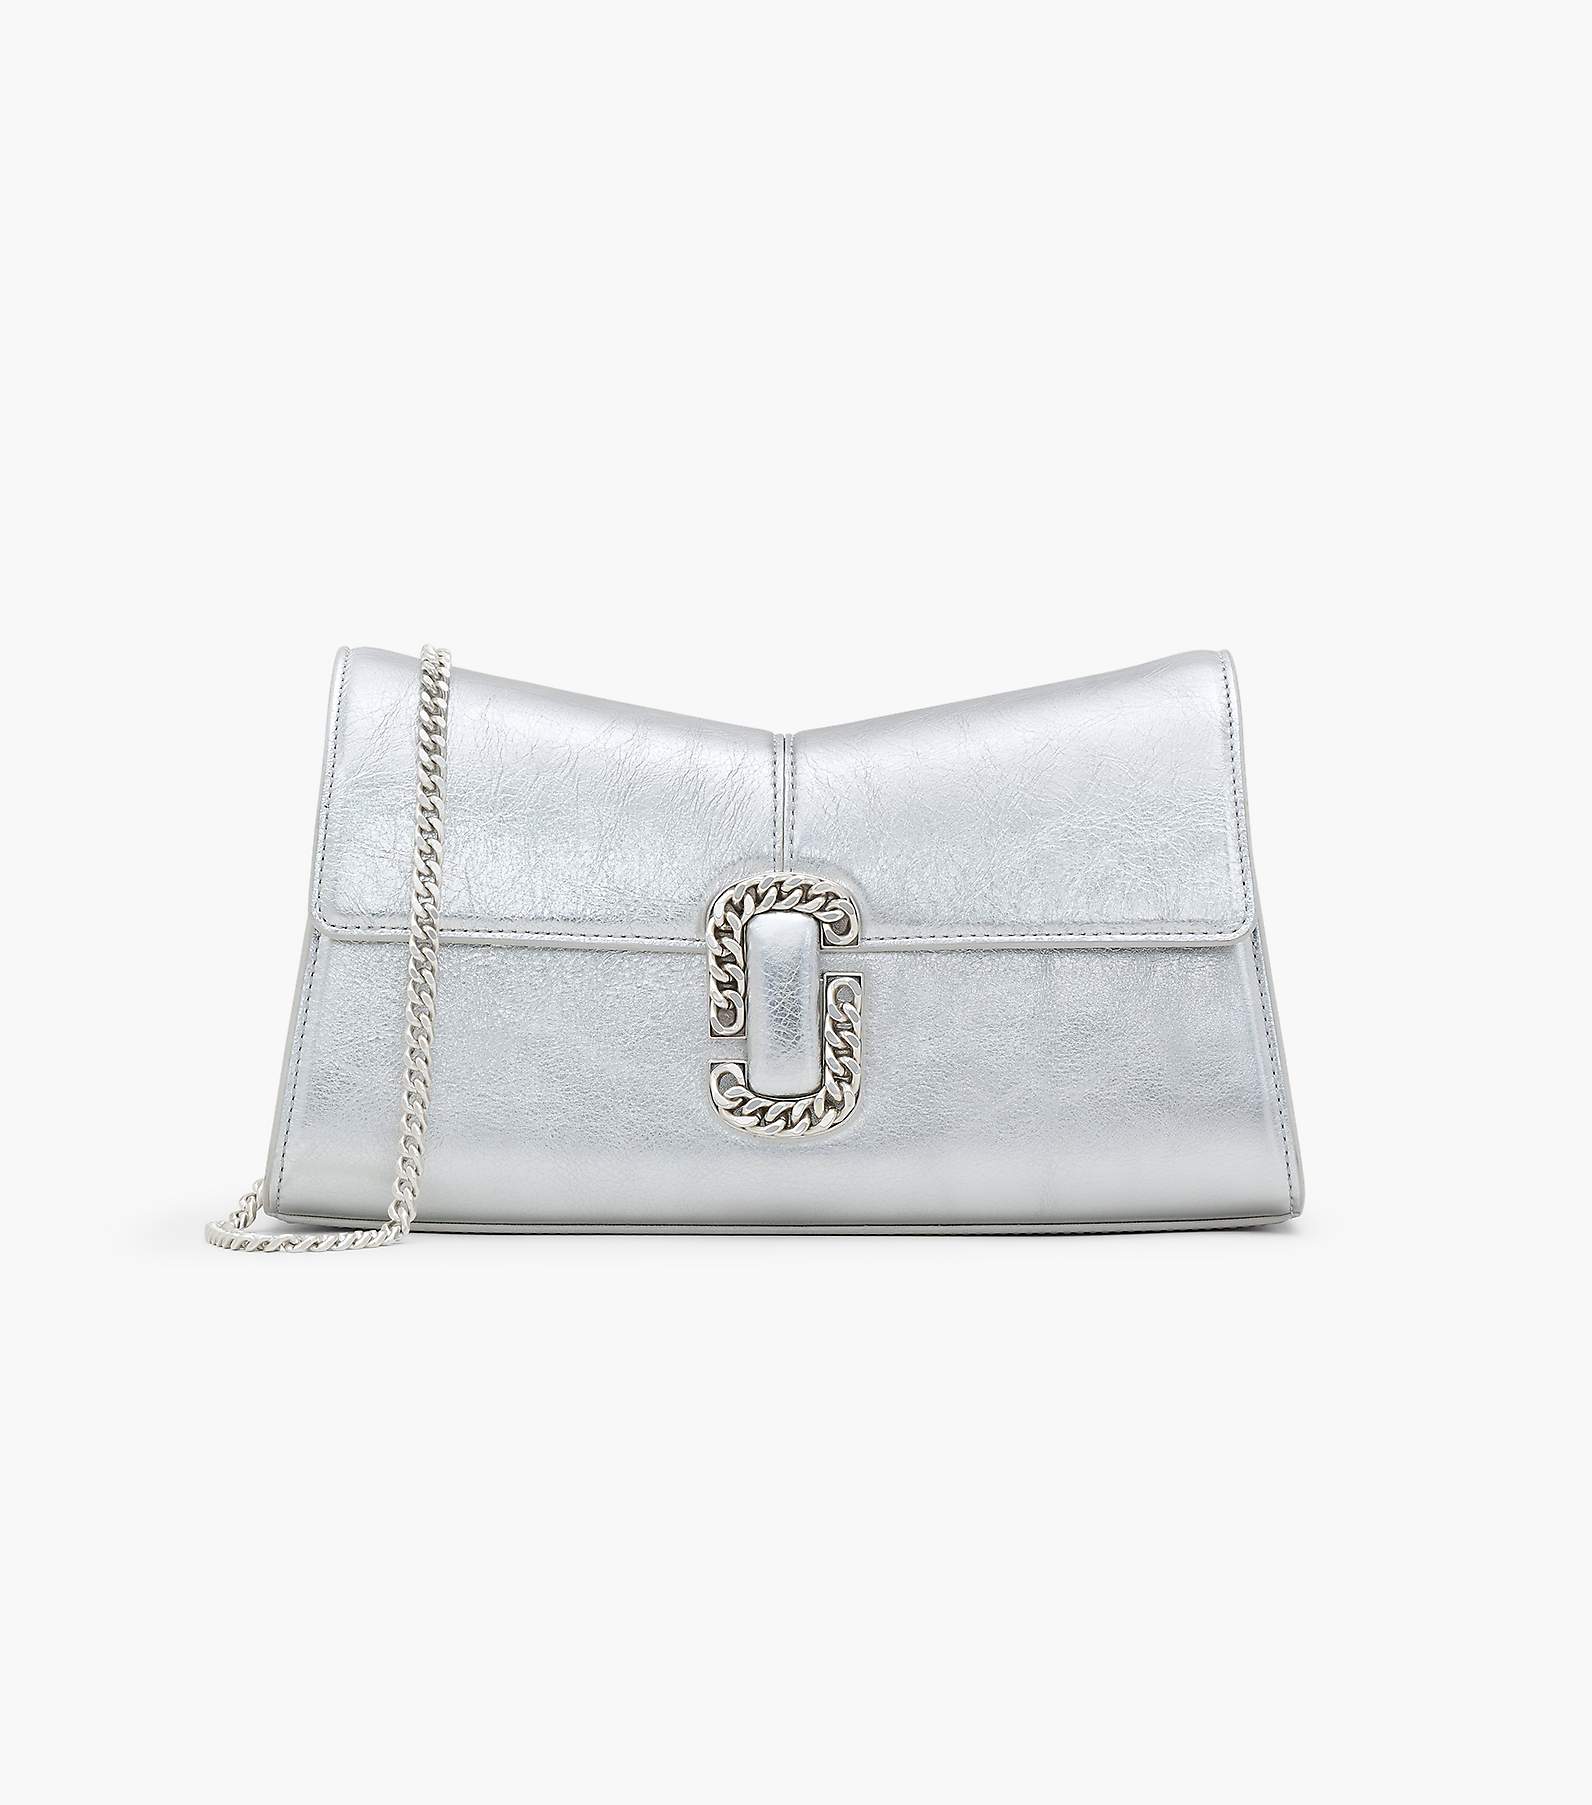 Marc Jacobs Authenticated Clutch Bag